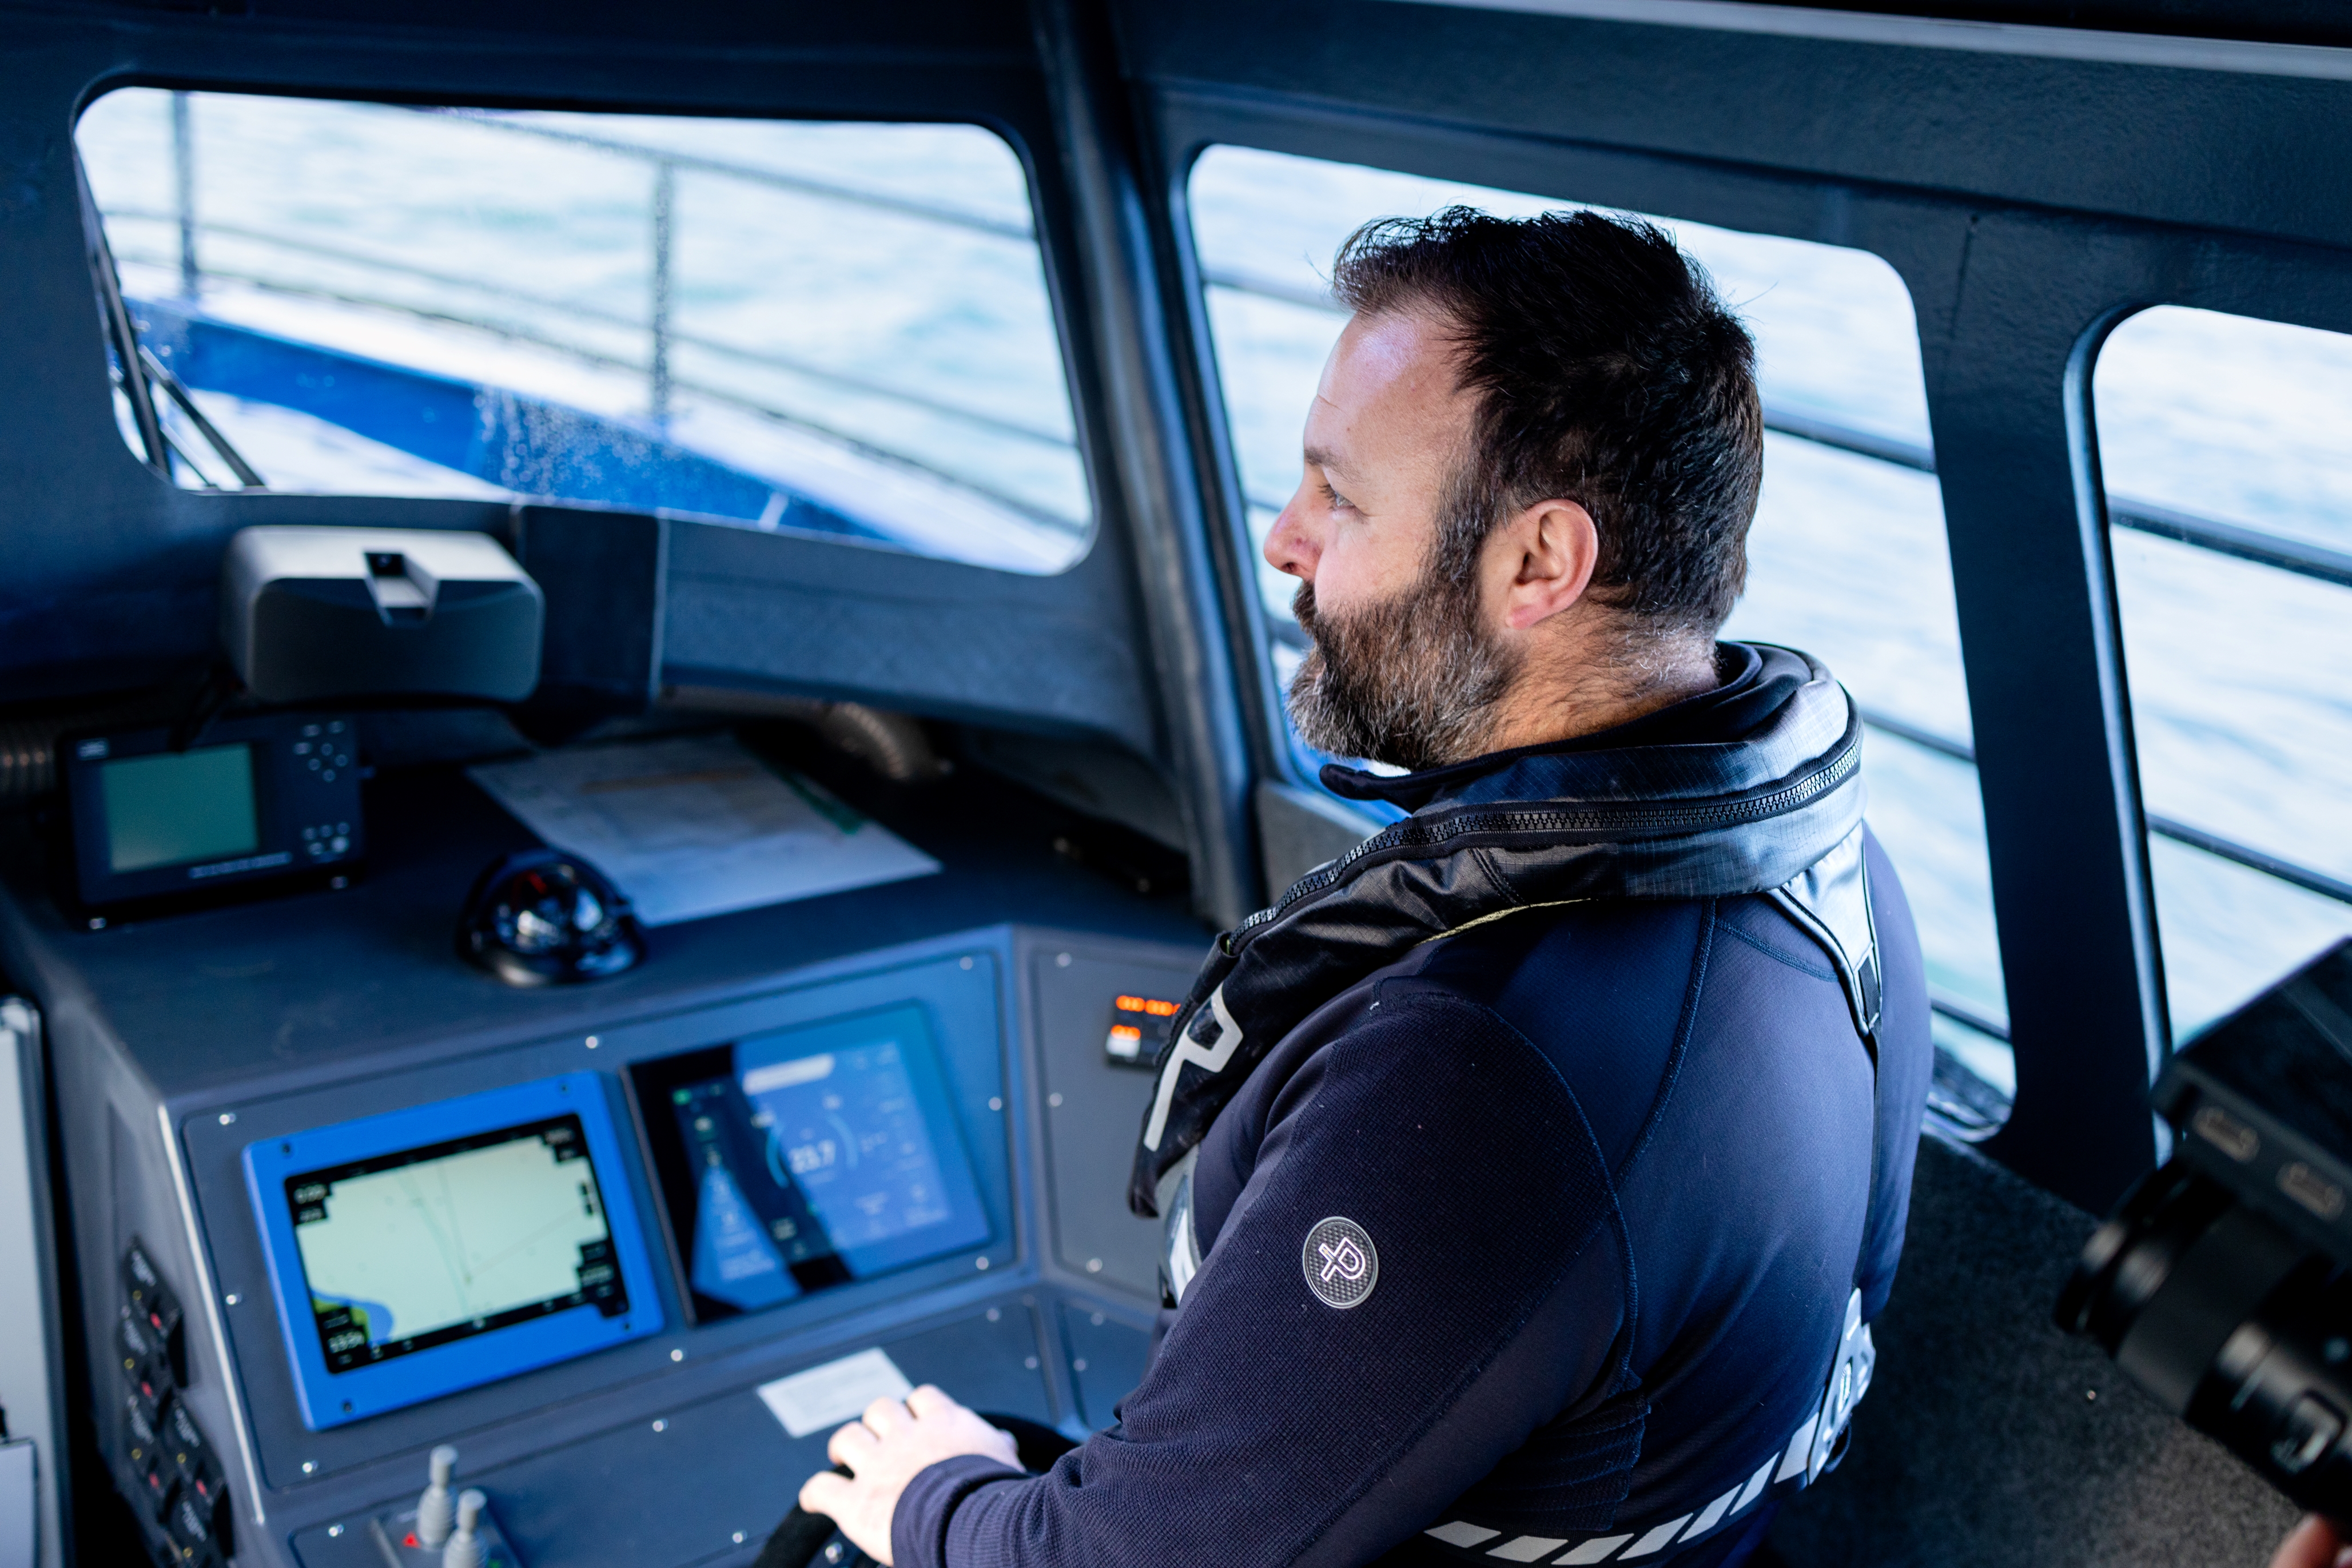 Man piloting a boat sitting at the wheel with a screen display in front of him